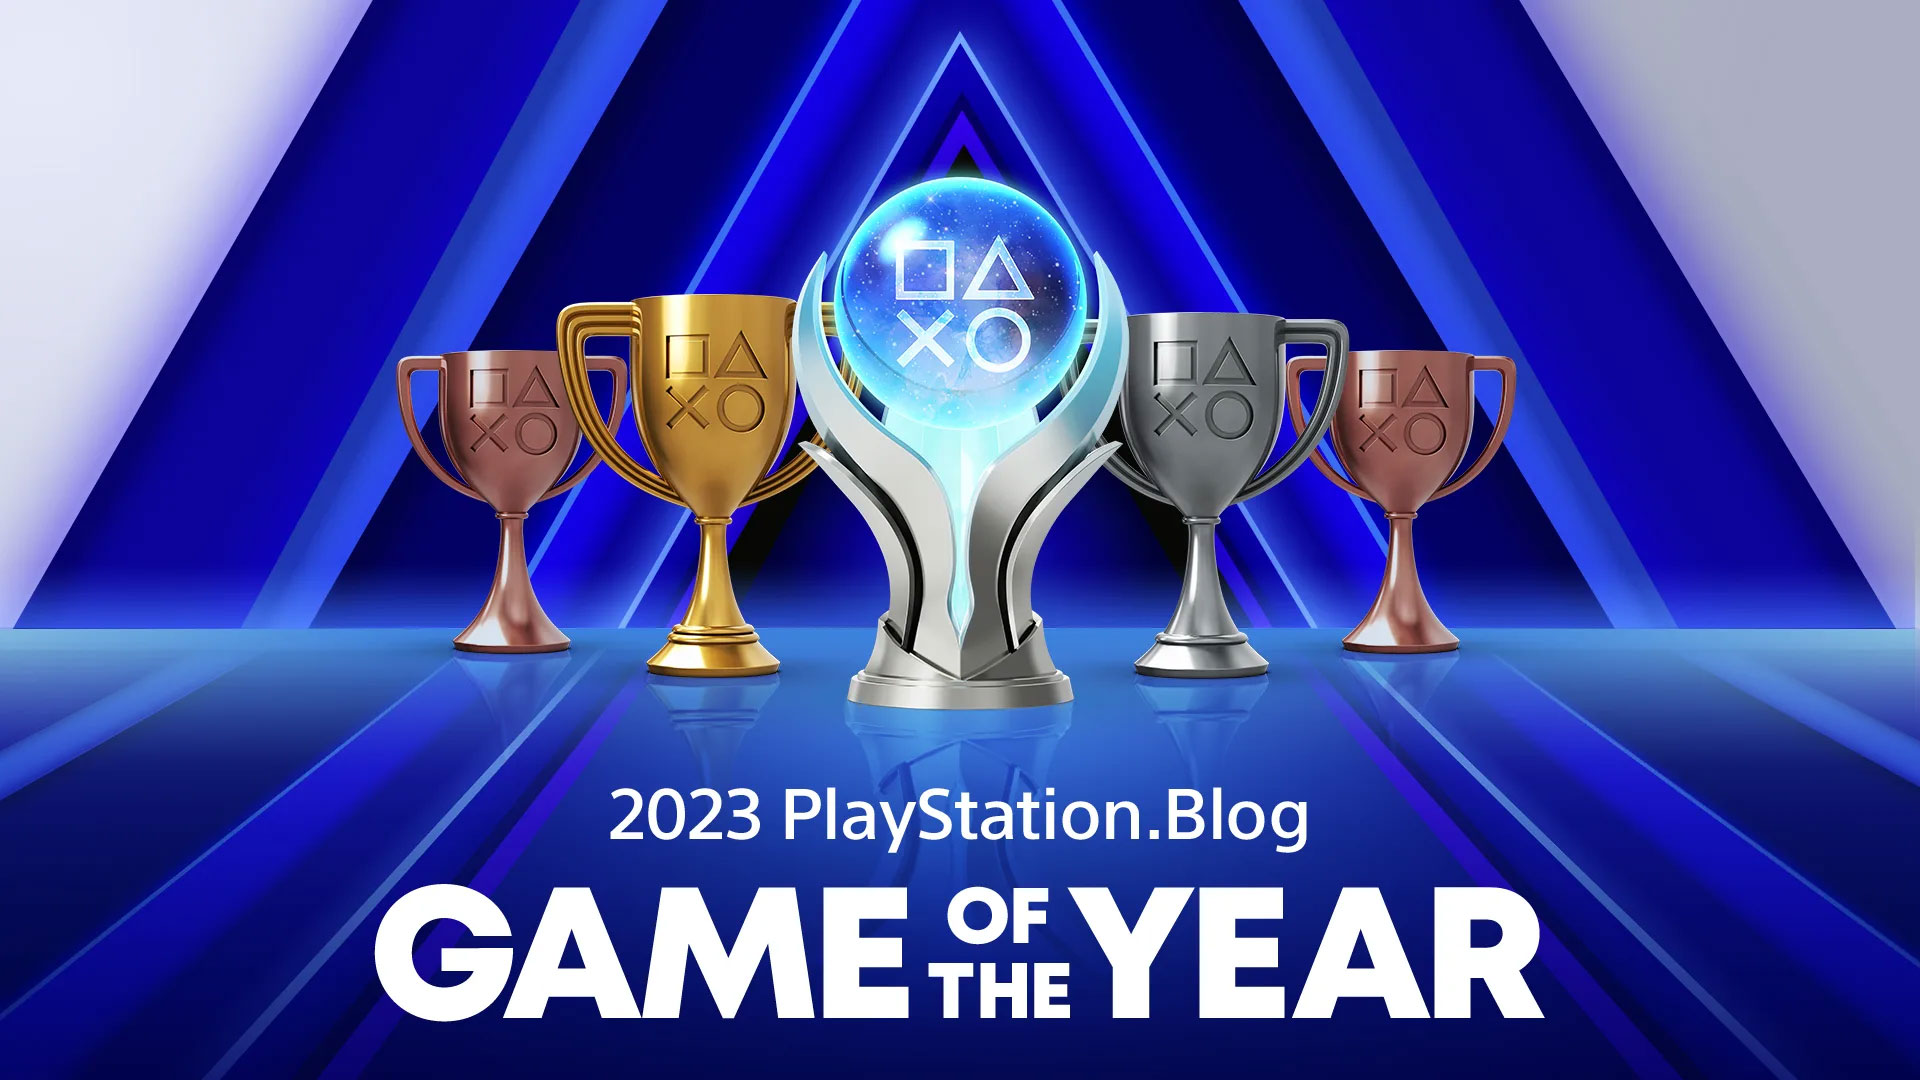 Vote for your favorite games of 2023 across 18 categories